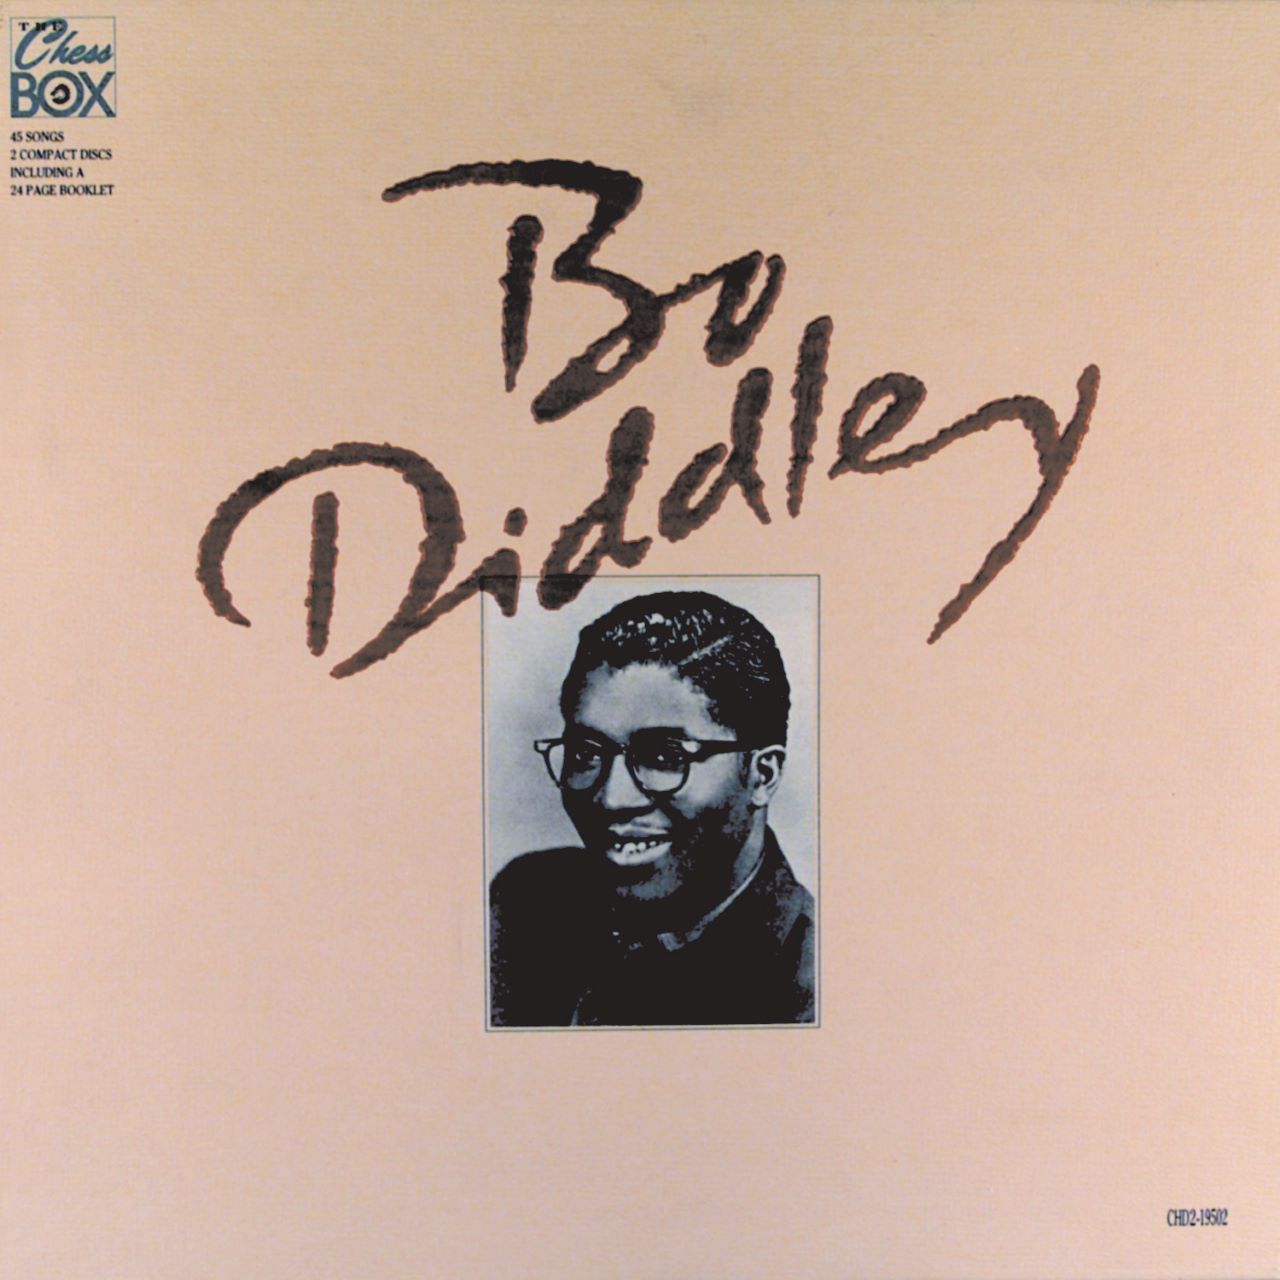 Bo Diddley – The Chess Box cover album